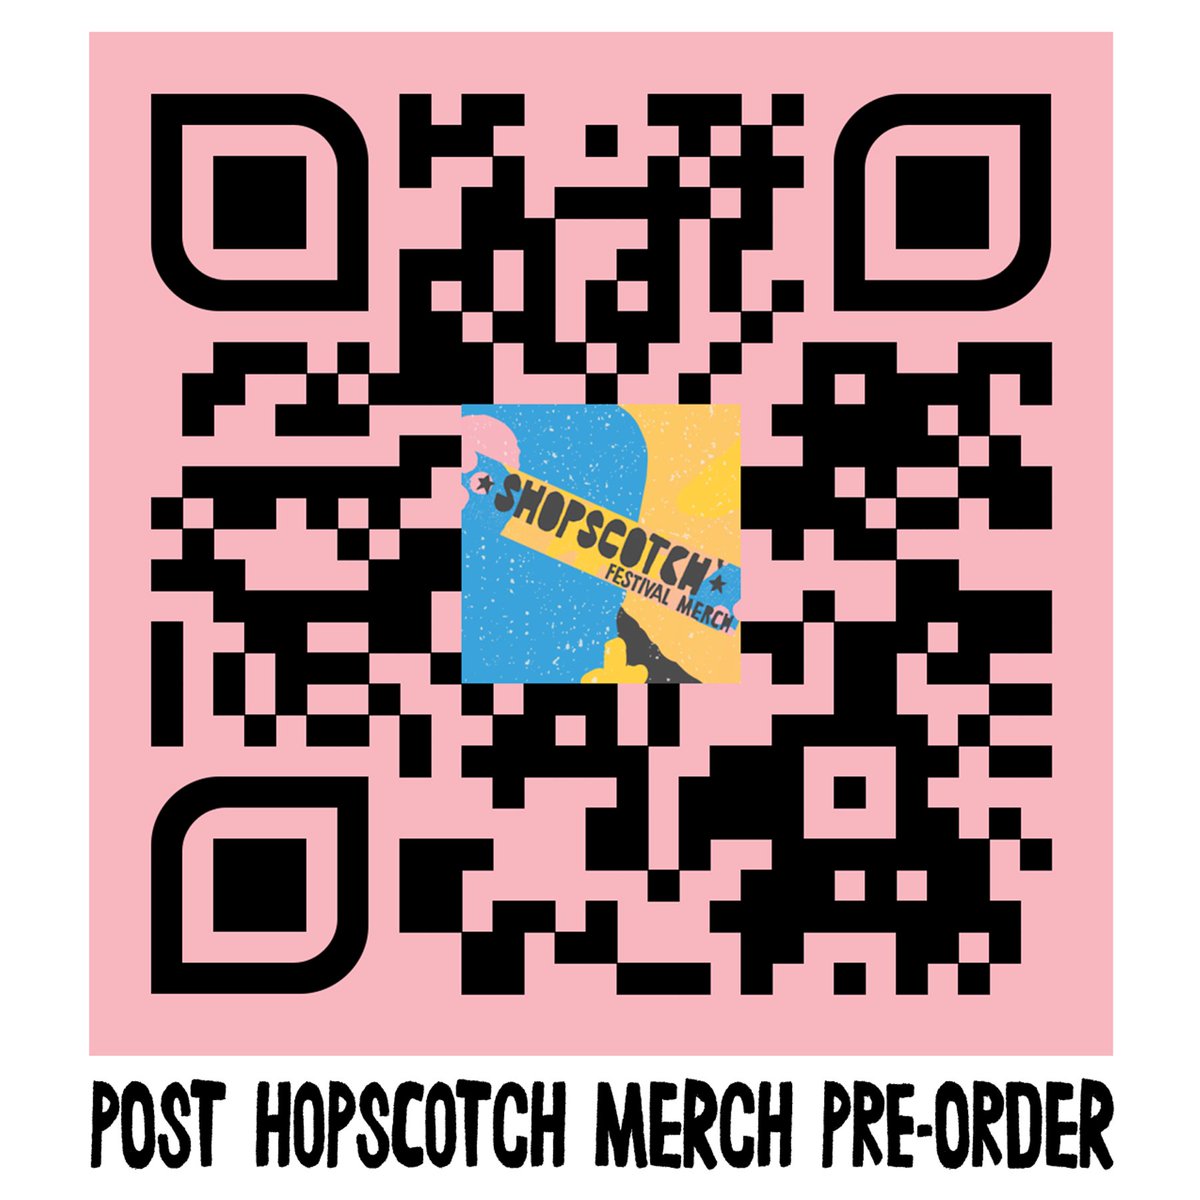 You guys really loved our shirts this year! Thank you so much for loving on the artists and our gem of a music festival. This is your last chance to get our 2023 designs so order now before they are all gone! 🔗: hopscotchfest.myshopify.com